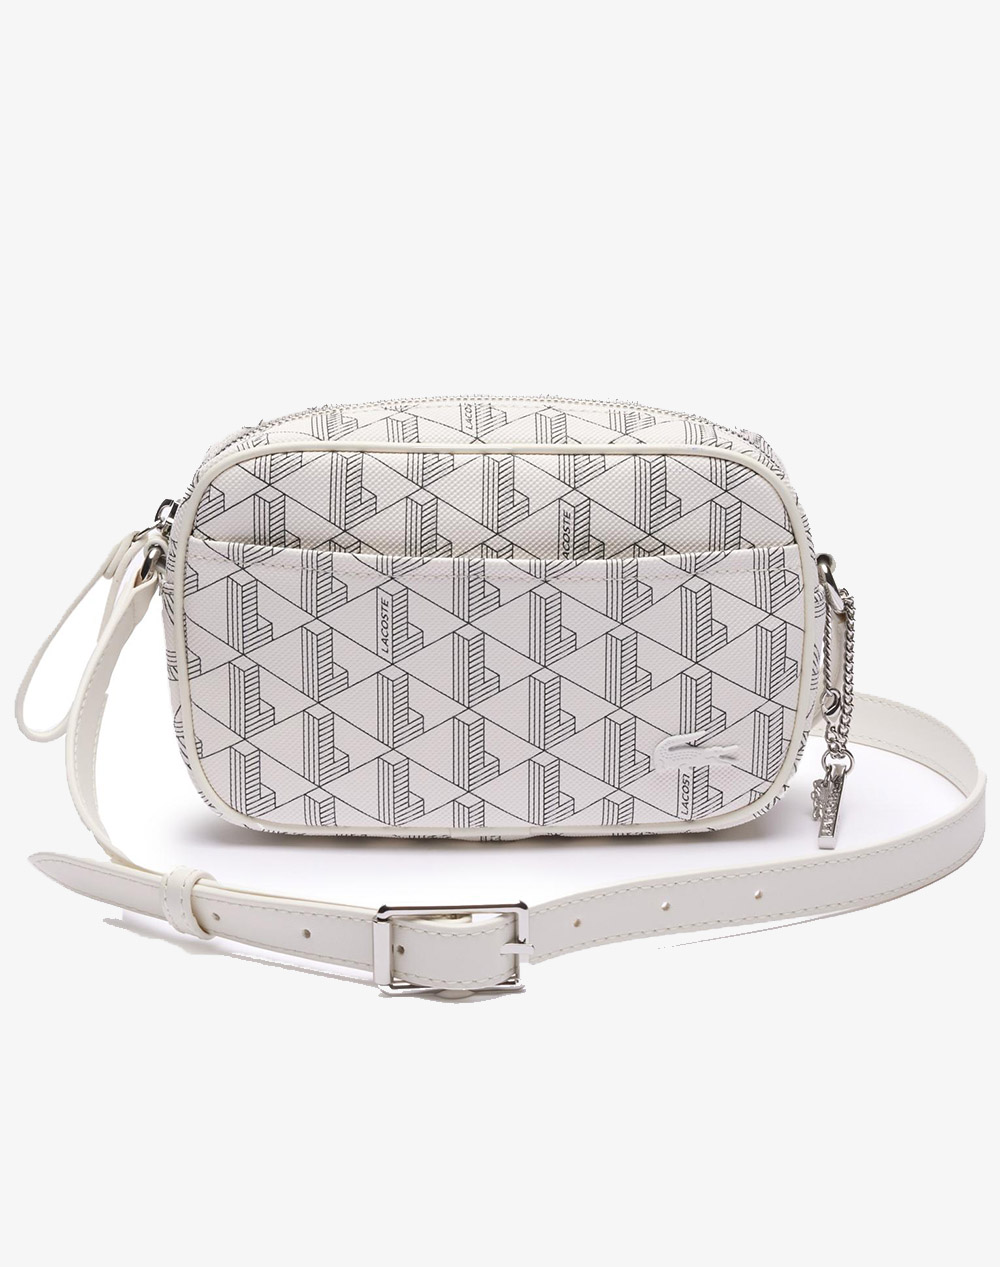 LACOSTE ΤΣΑΝΤΑ CROSSOVER BAG (Διαστάσεις: 20 x 5.5 x 13 εκ) 3NF4354DG-N06 OffWhite